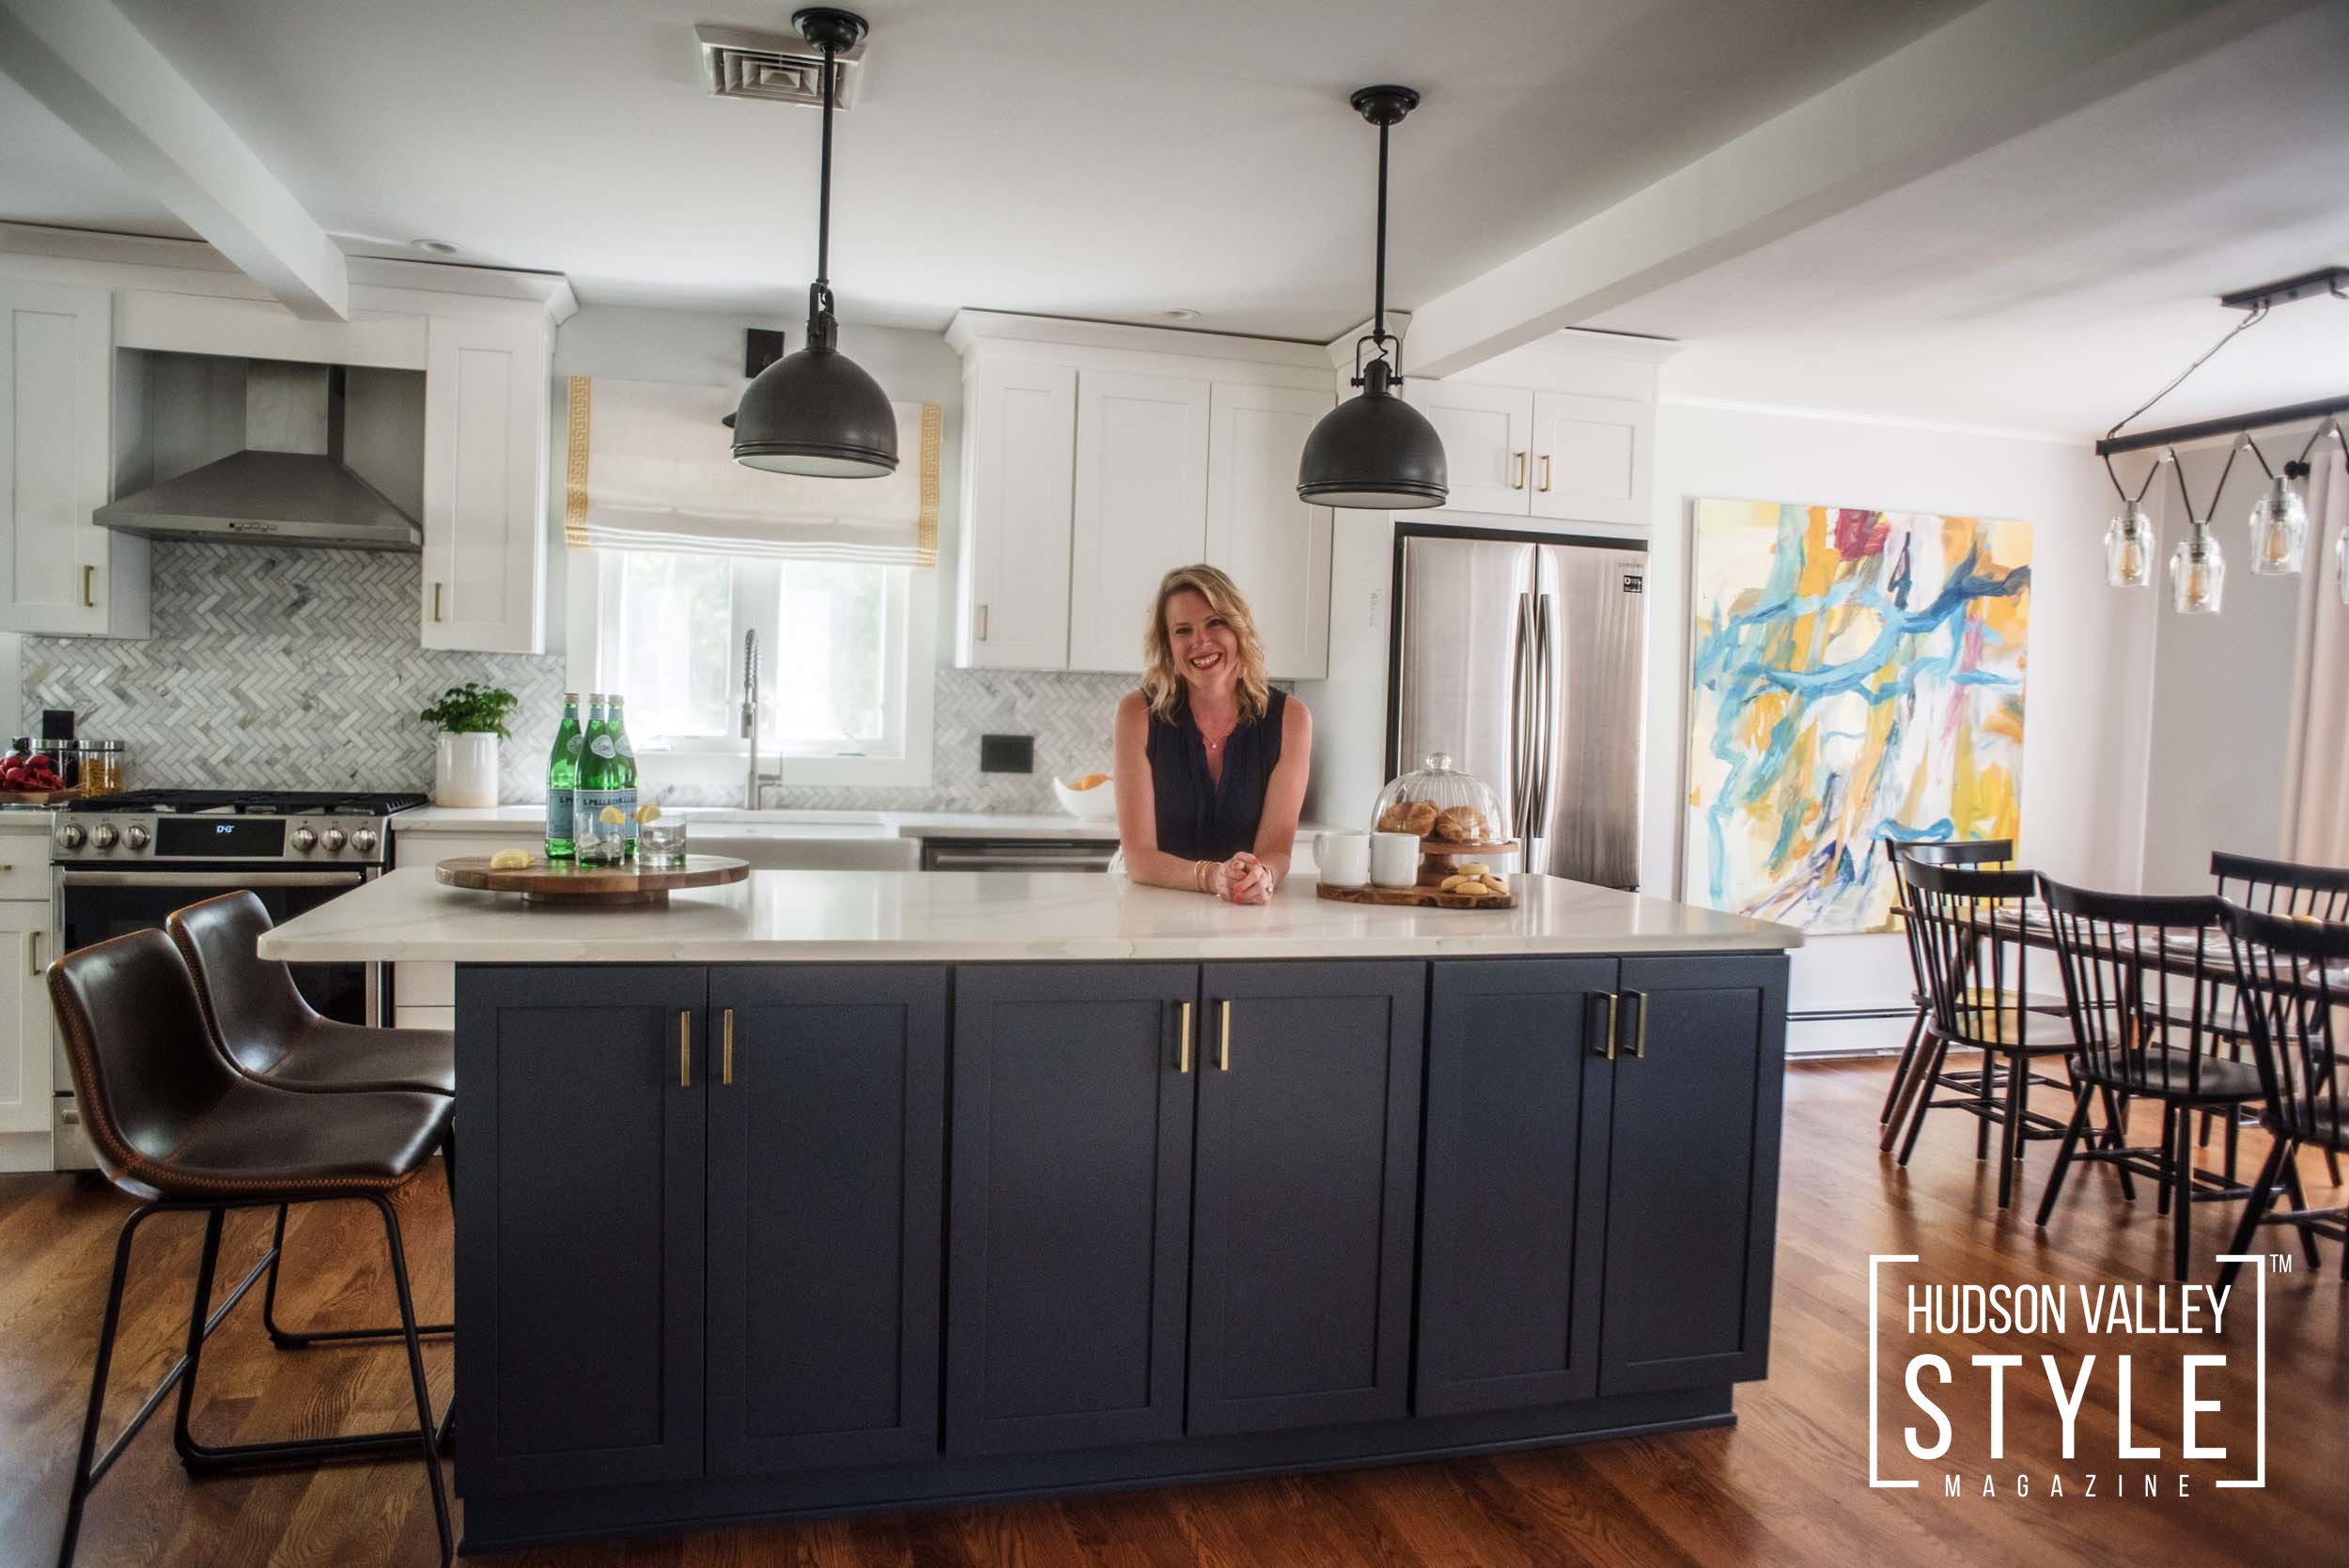 Modern Farmhouse in Woodstock, NY - Interior Design Project by Jennifer Lynn - Interview by Maxwell Alexander, Editor-in-Chief, Hudson Valley Style Magazine - Photography by Leyla Cadabal